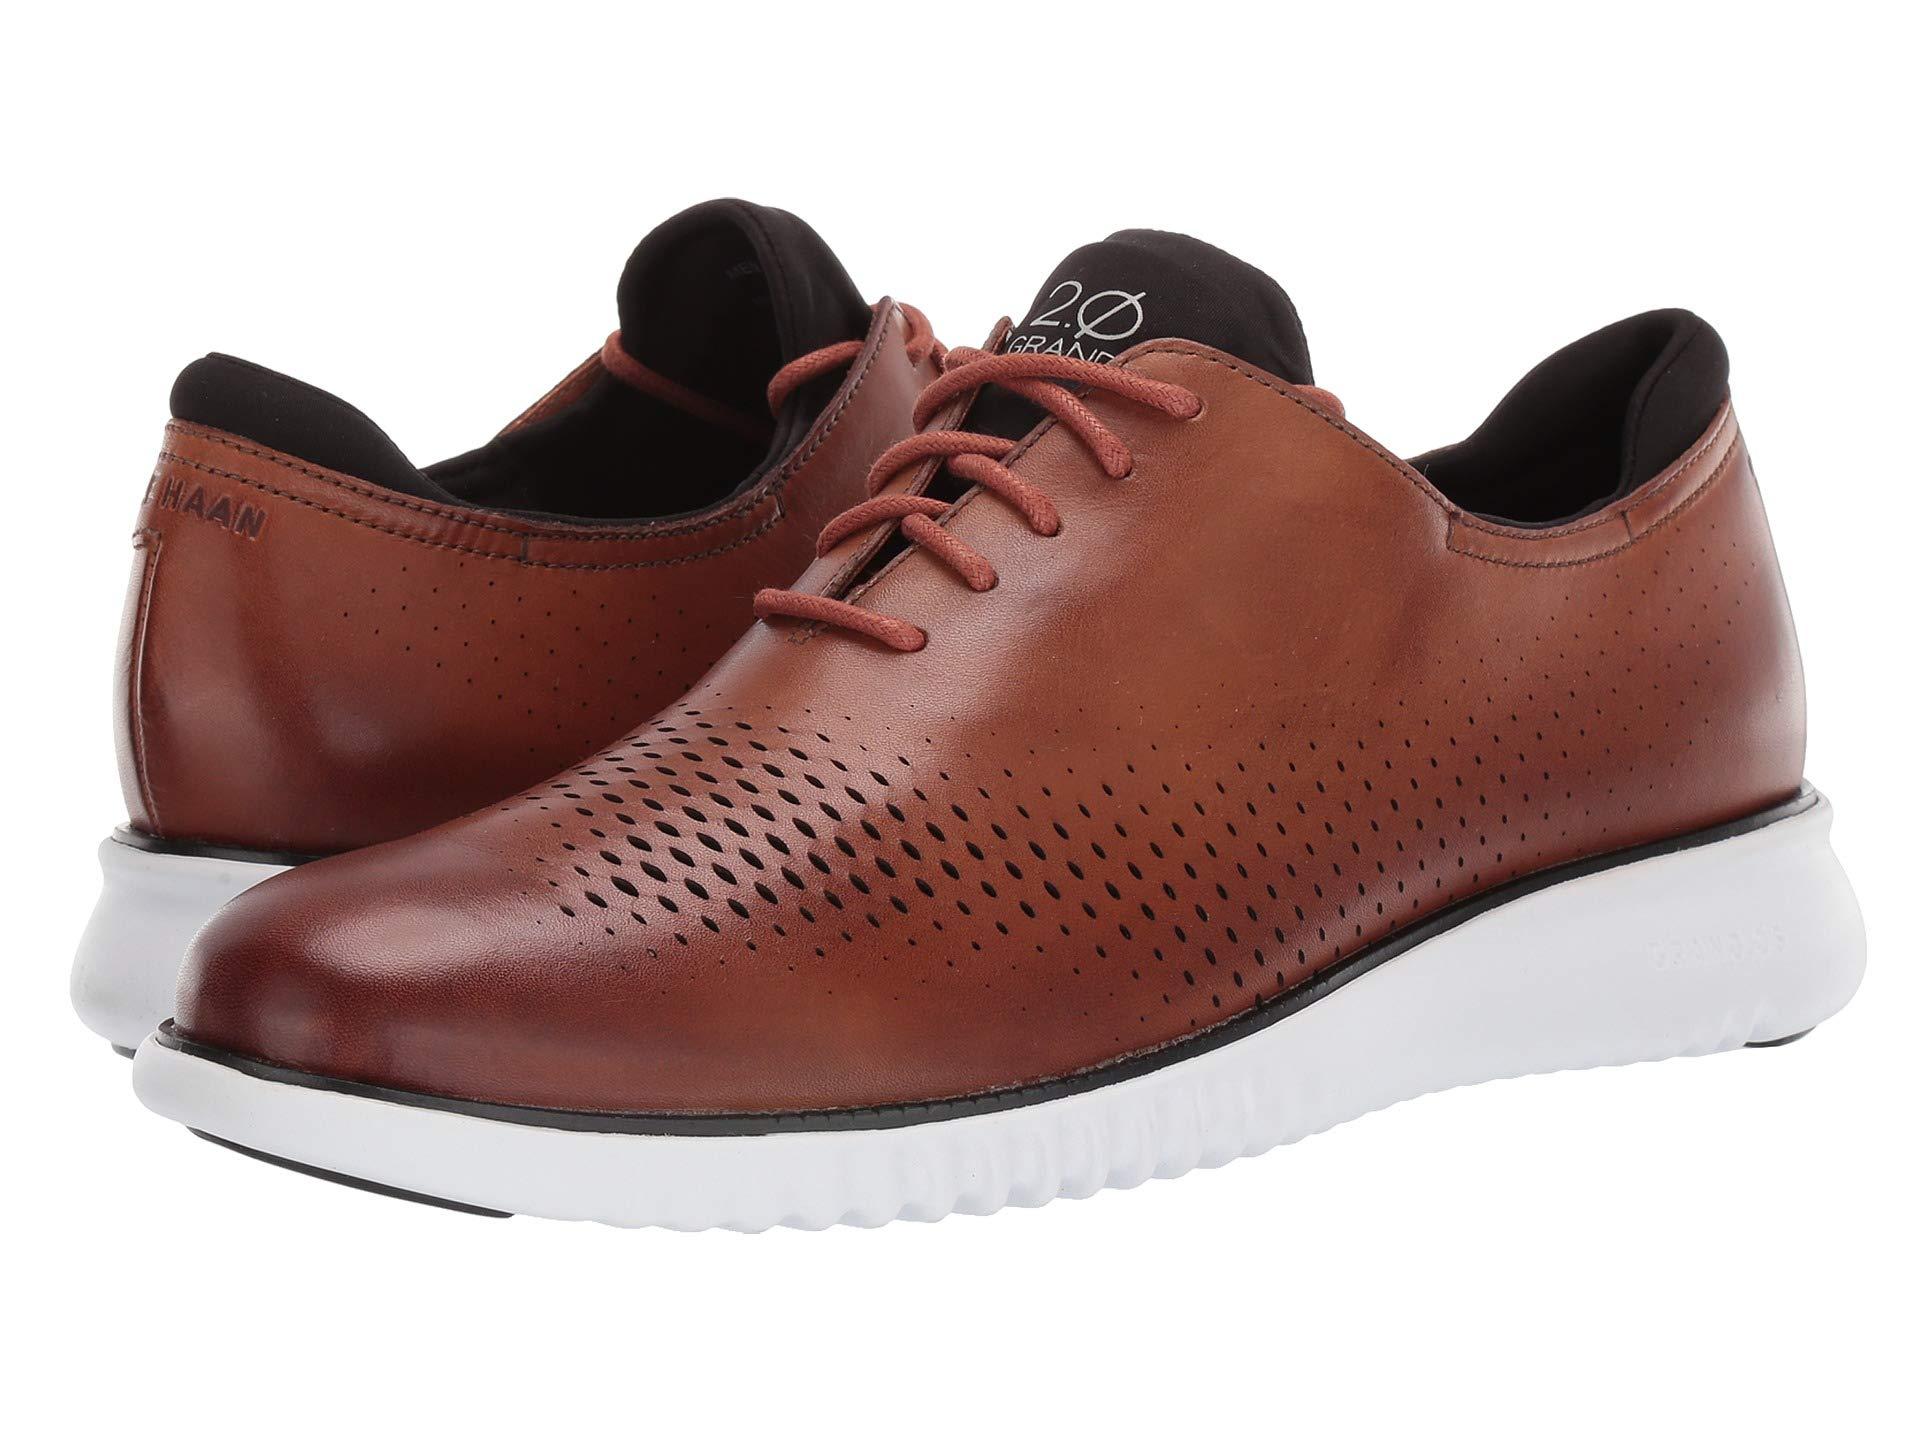 Cole Haan Leather 2.zerogrand Lsr Wing in Brown for Men - Lyst